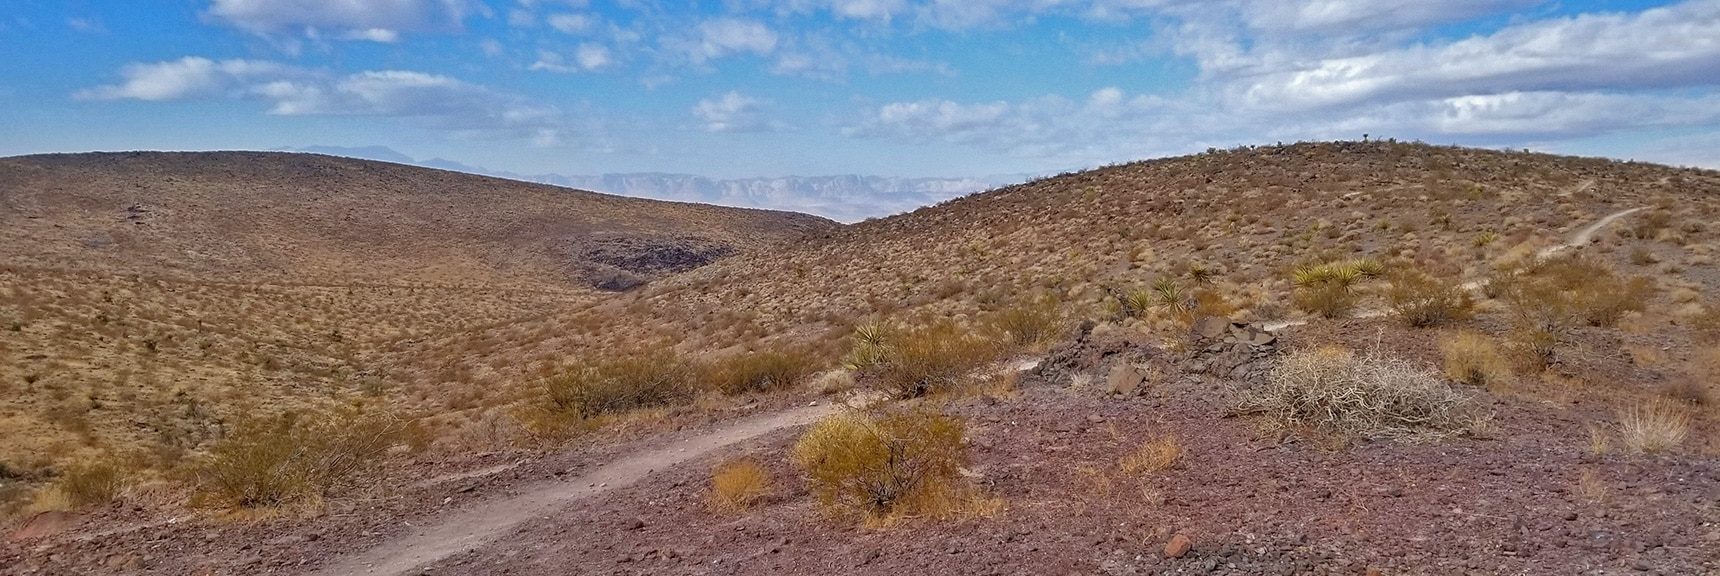 Looking Toward Anthem and Across the Las Vegas Valley to Rainbow Mountains and Red Rock Park| McCullough Hills Trail in Sloan Canyon National Conservation Area, Nevada